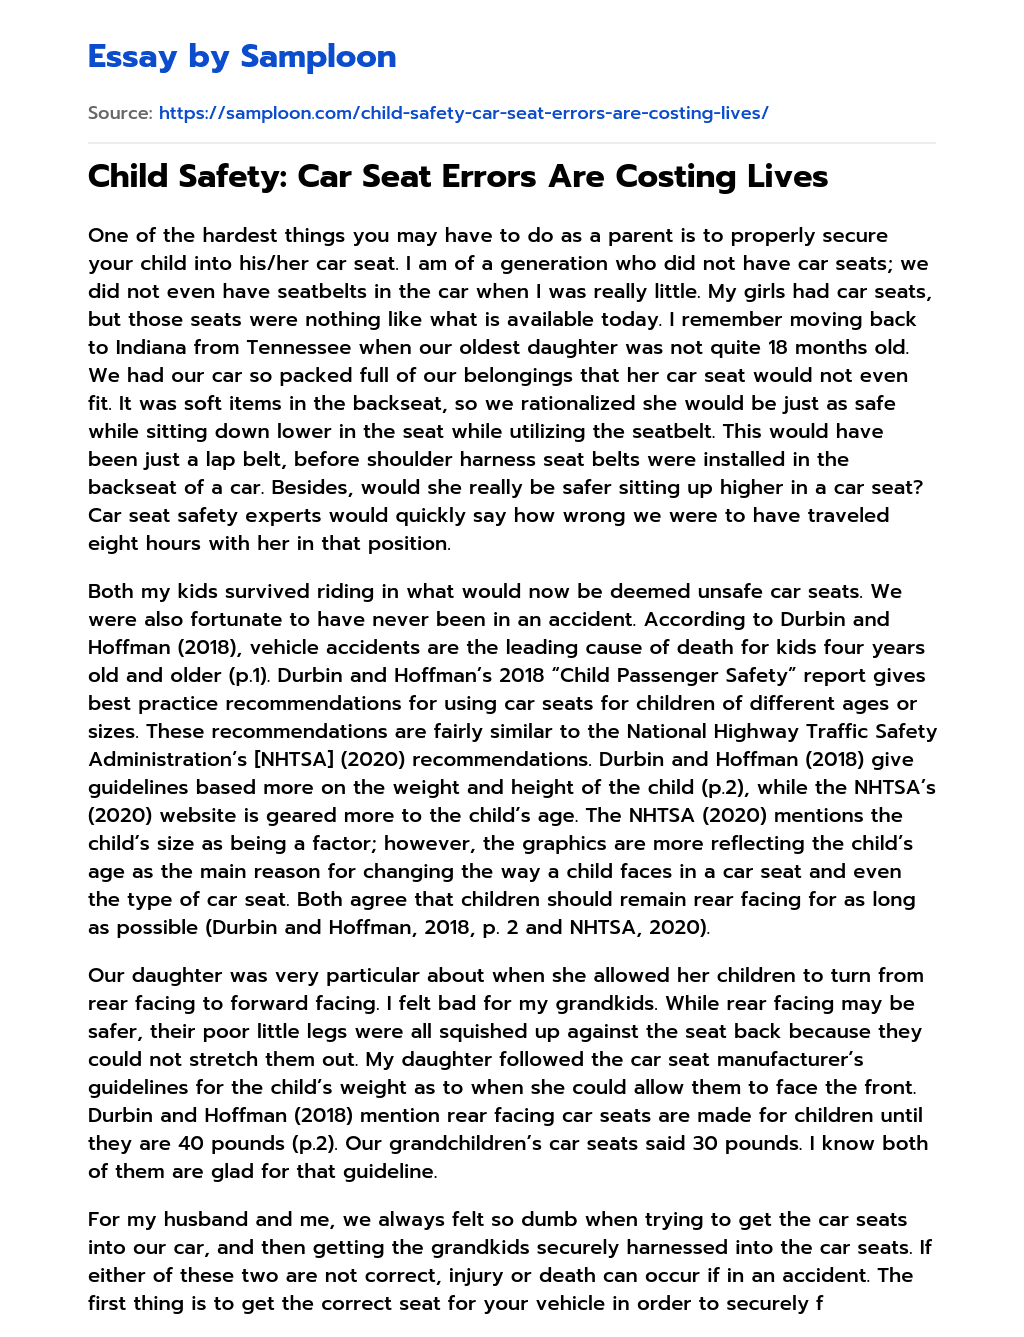 Child Safety: Car Seat Errors Are Costing Lives essay